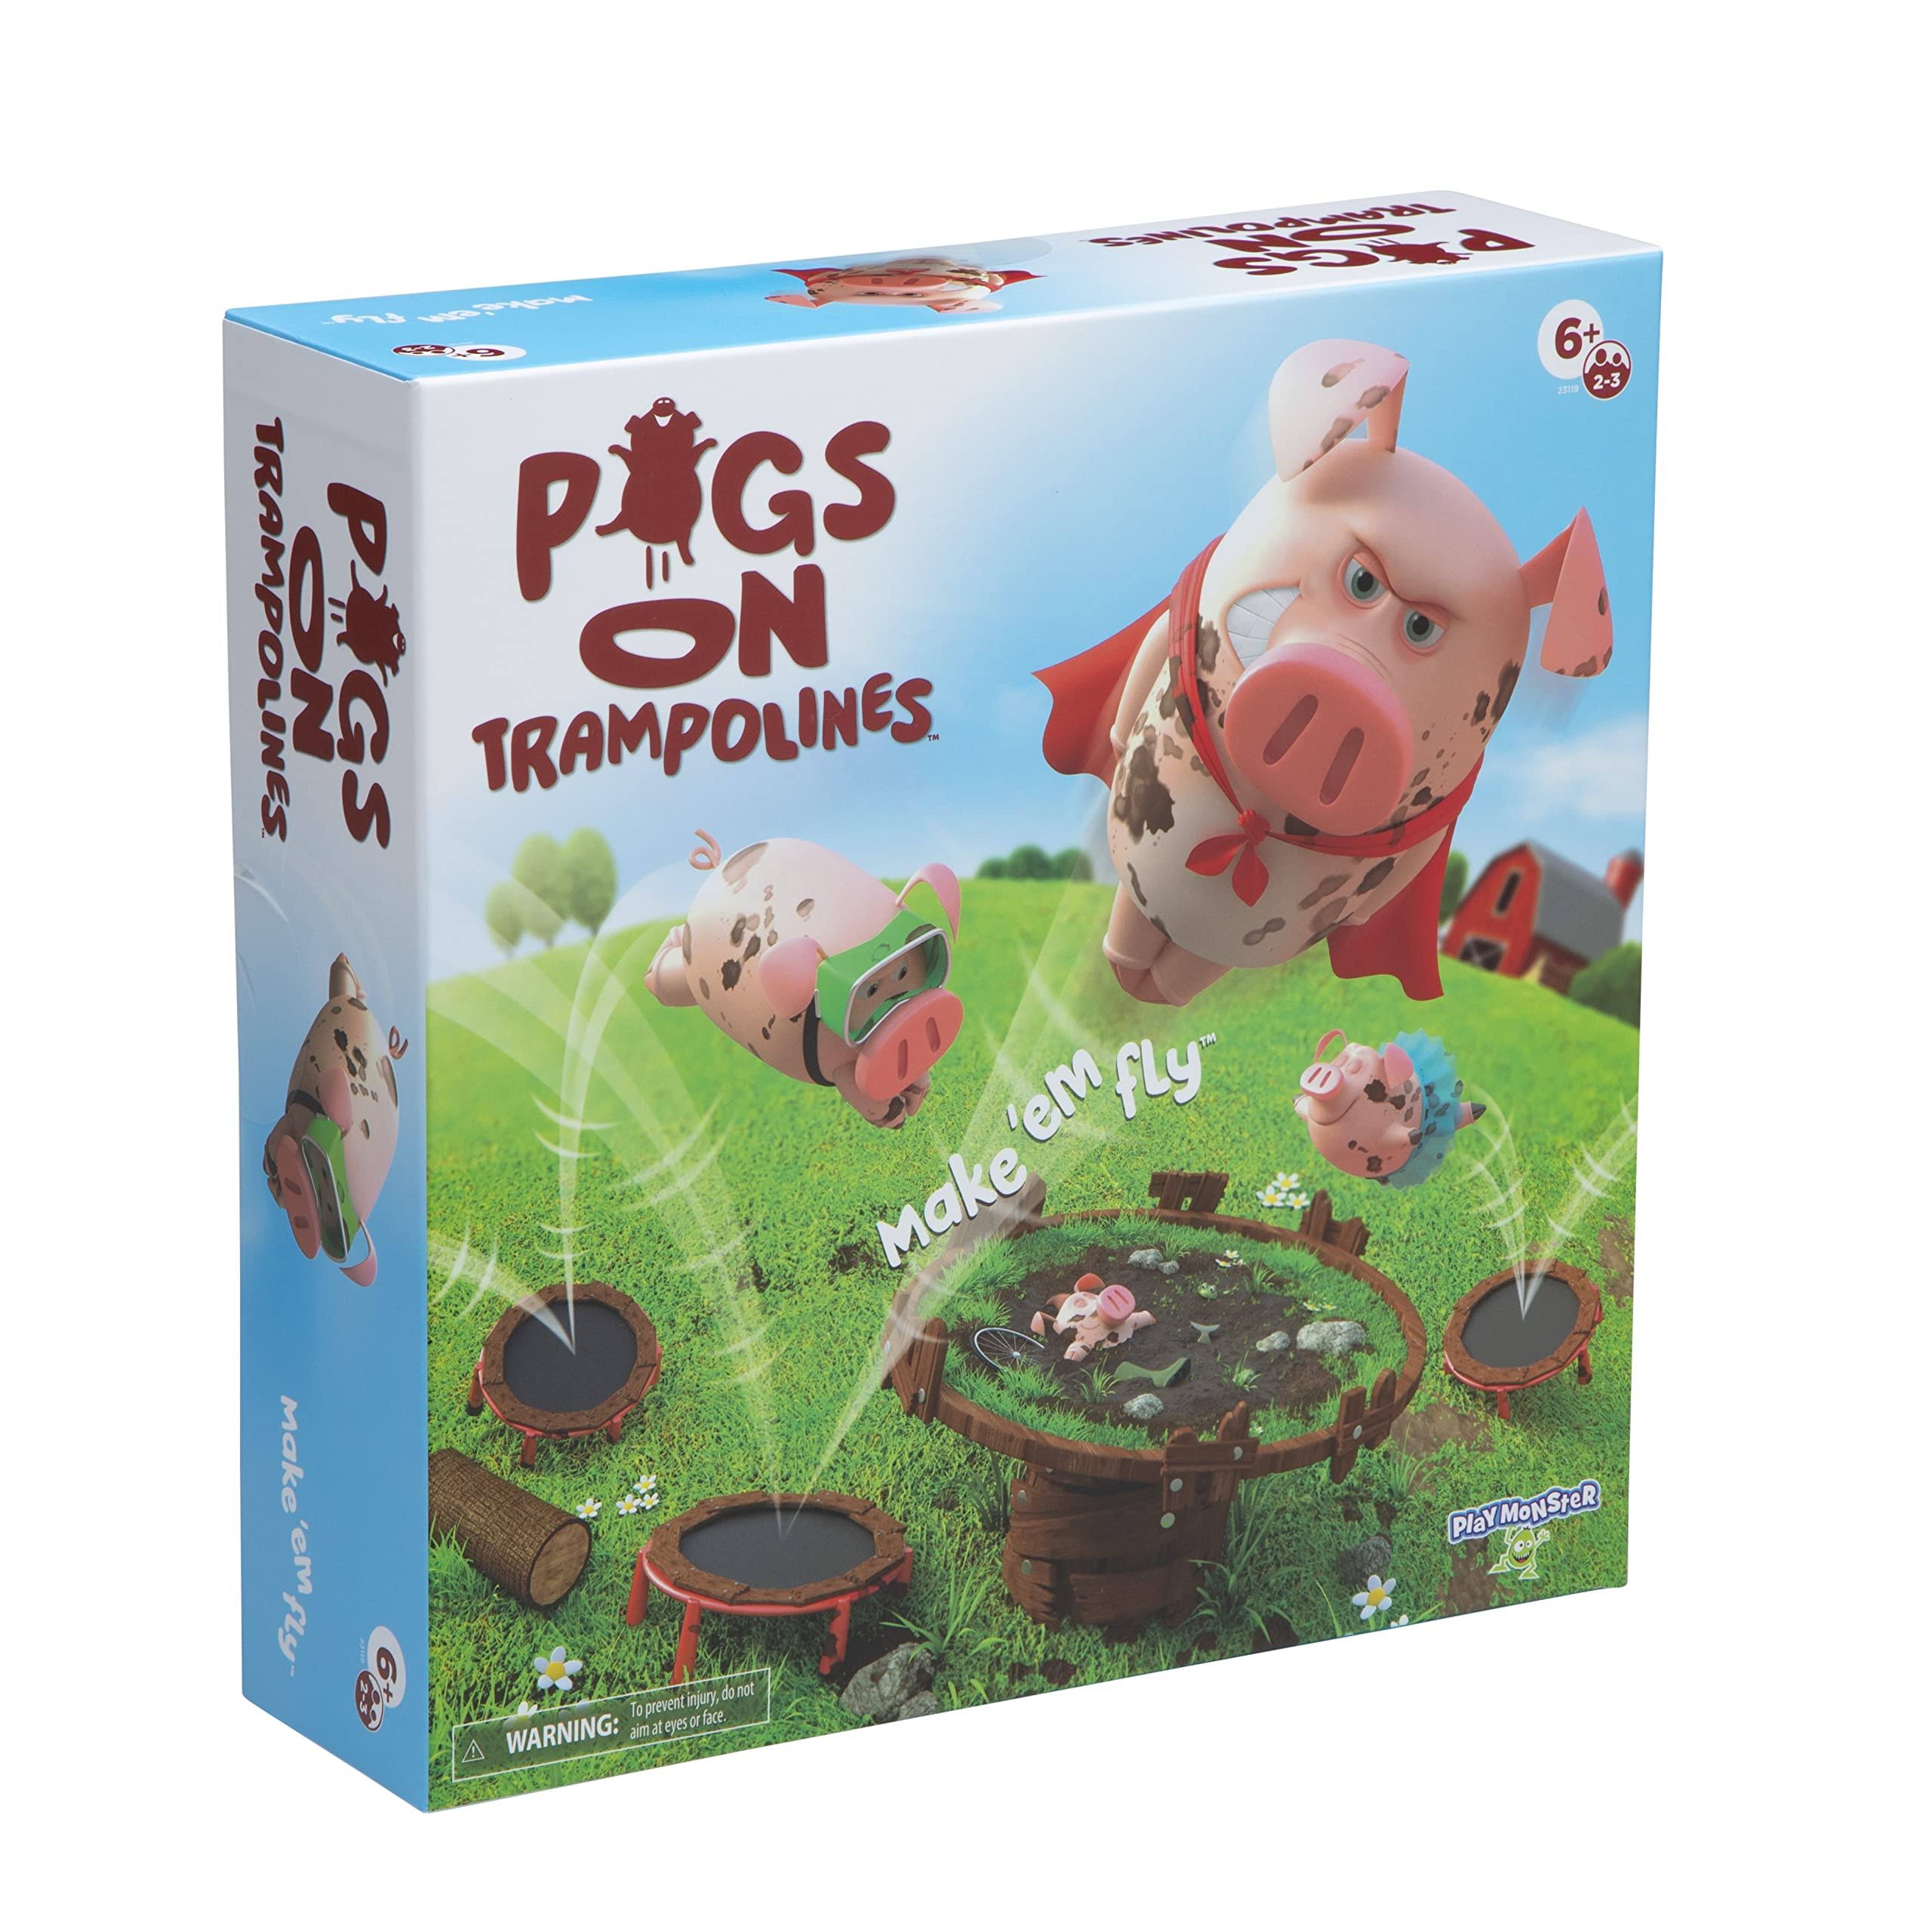 Pigs On Trampolines - The Silly Fast Fun Family Game of Making Pigs Fly - by PlayMonster